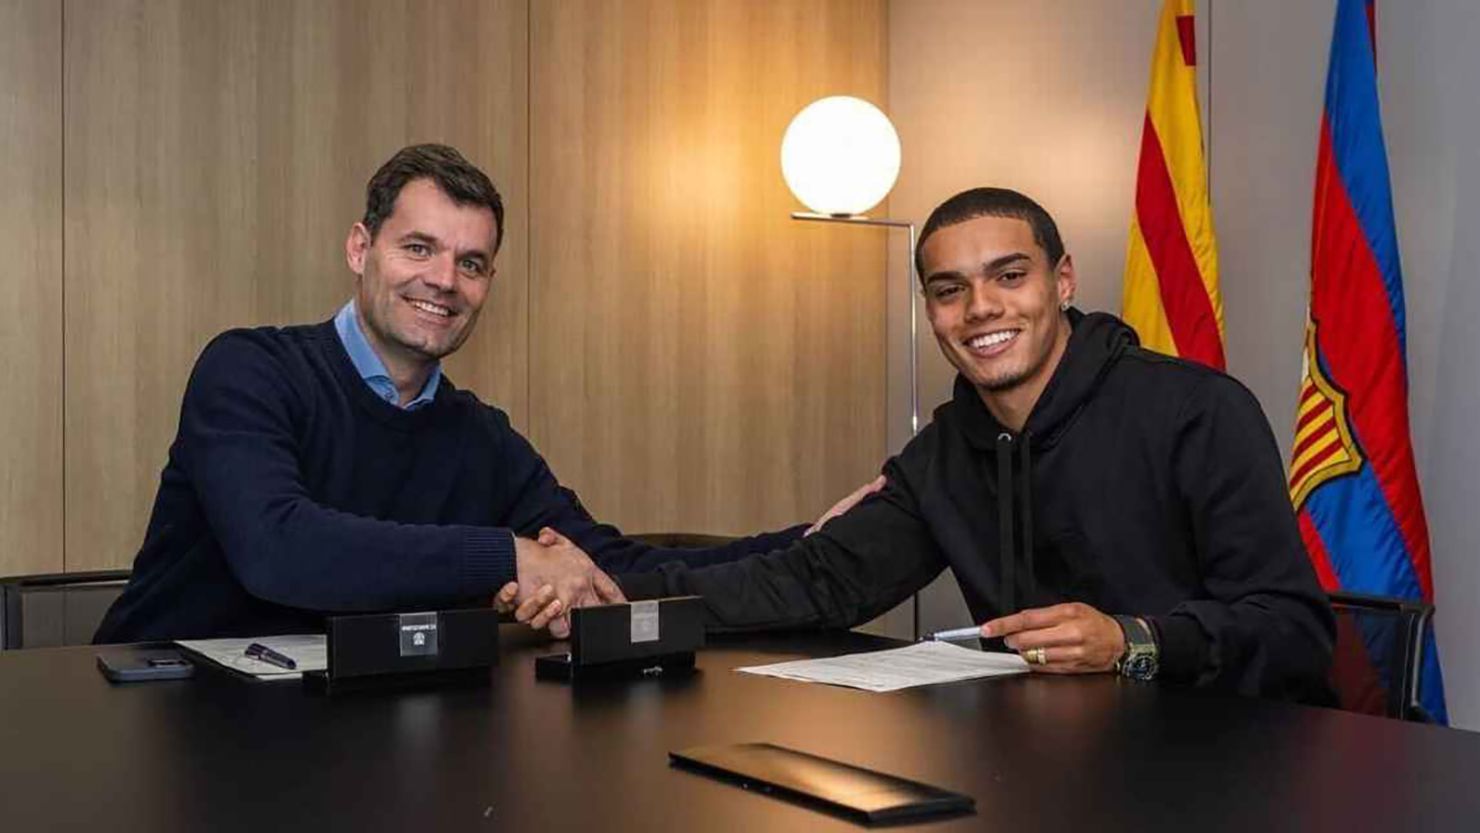 Ronaldinho's son, João Mendes, has signed a contract with Barcelona's under-19 team.